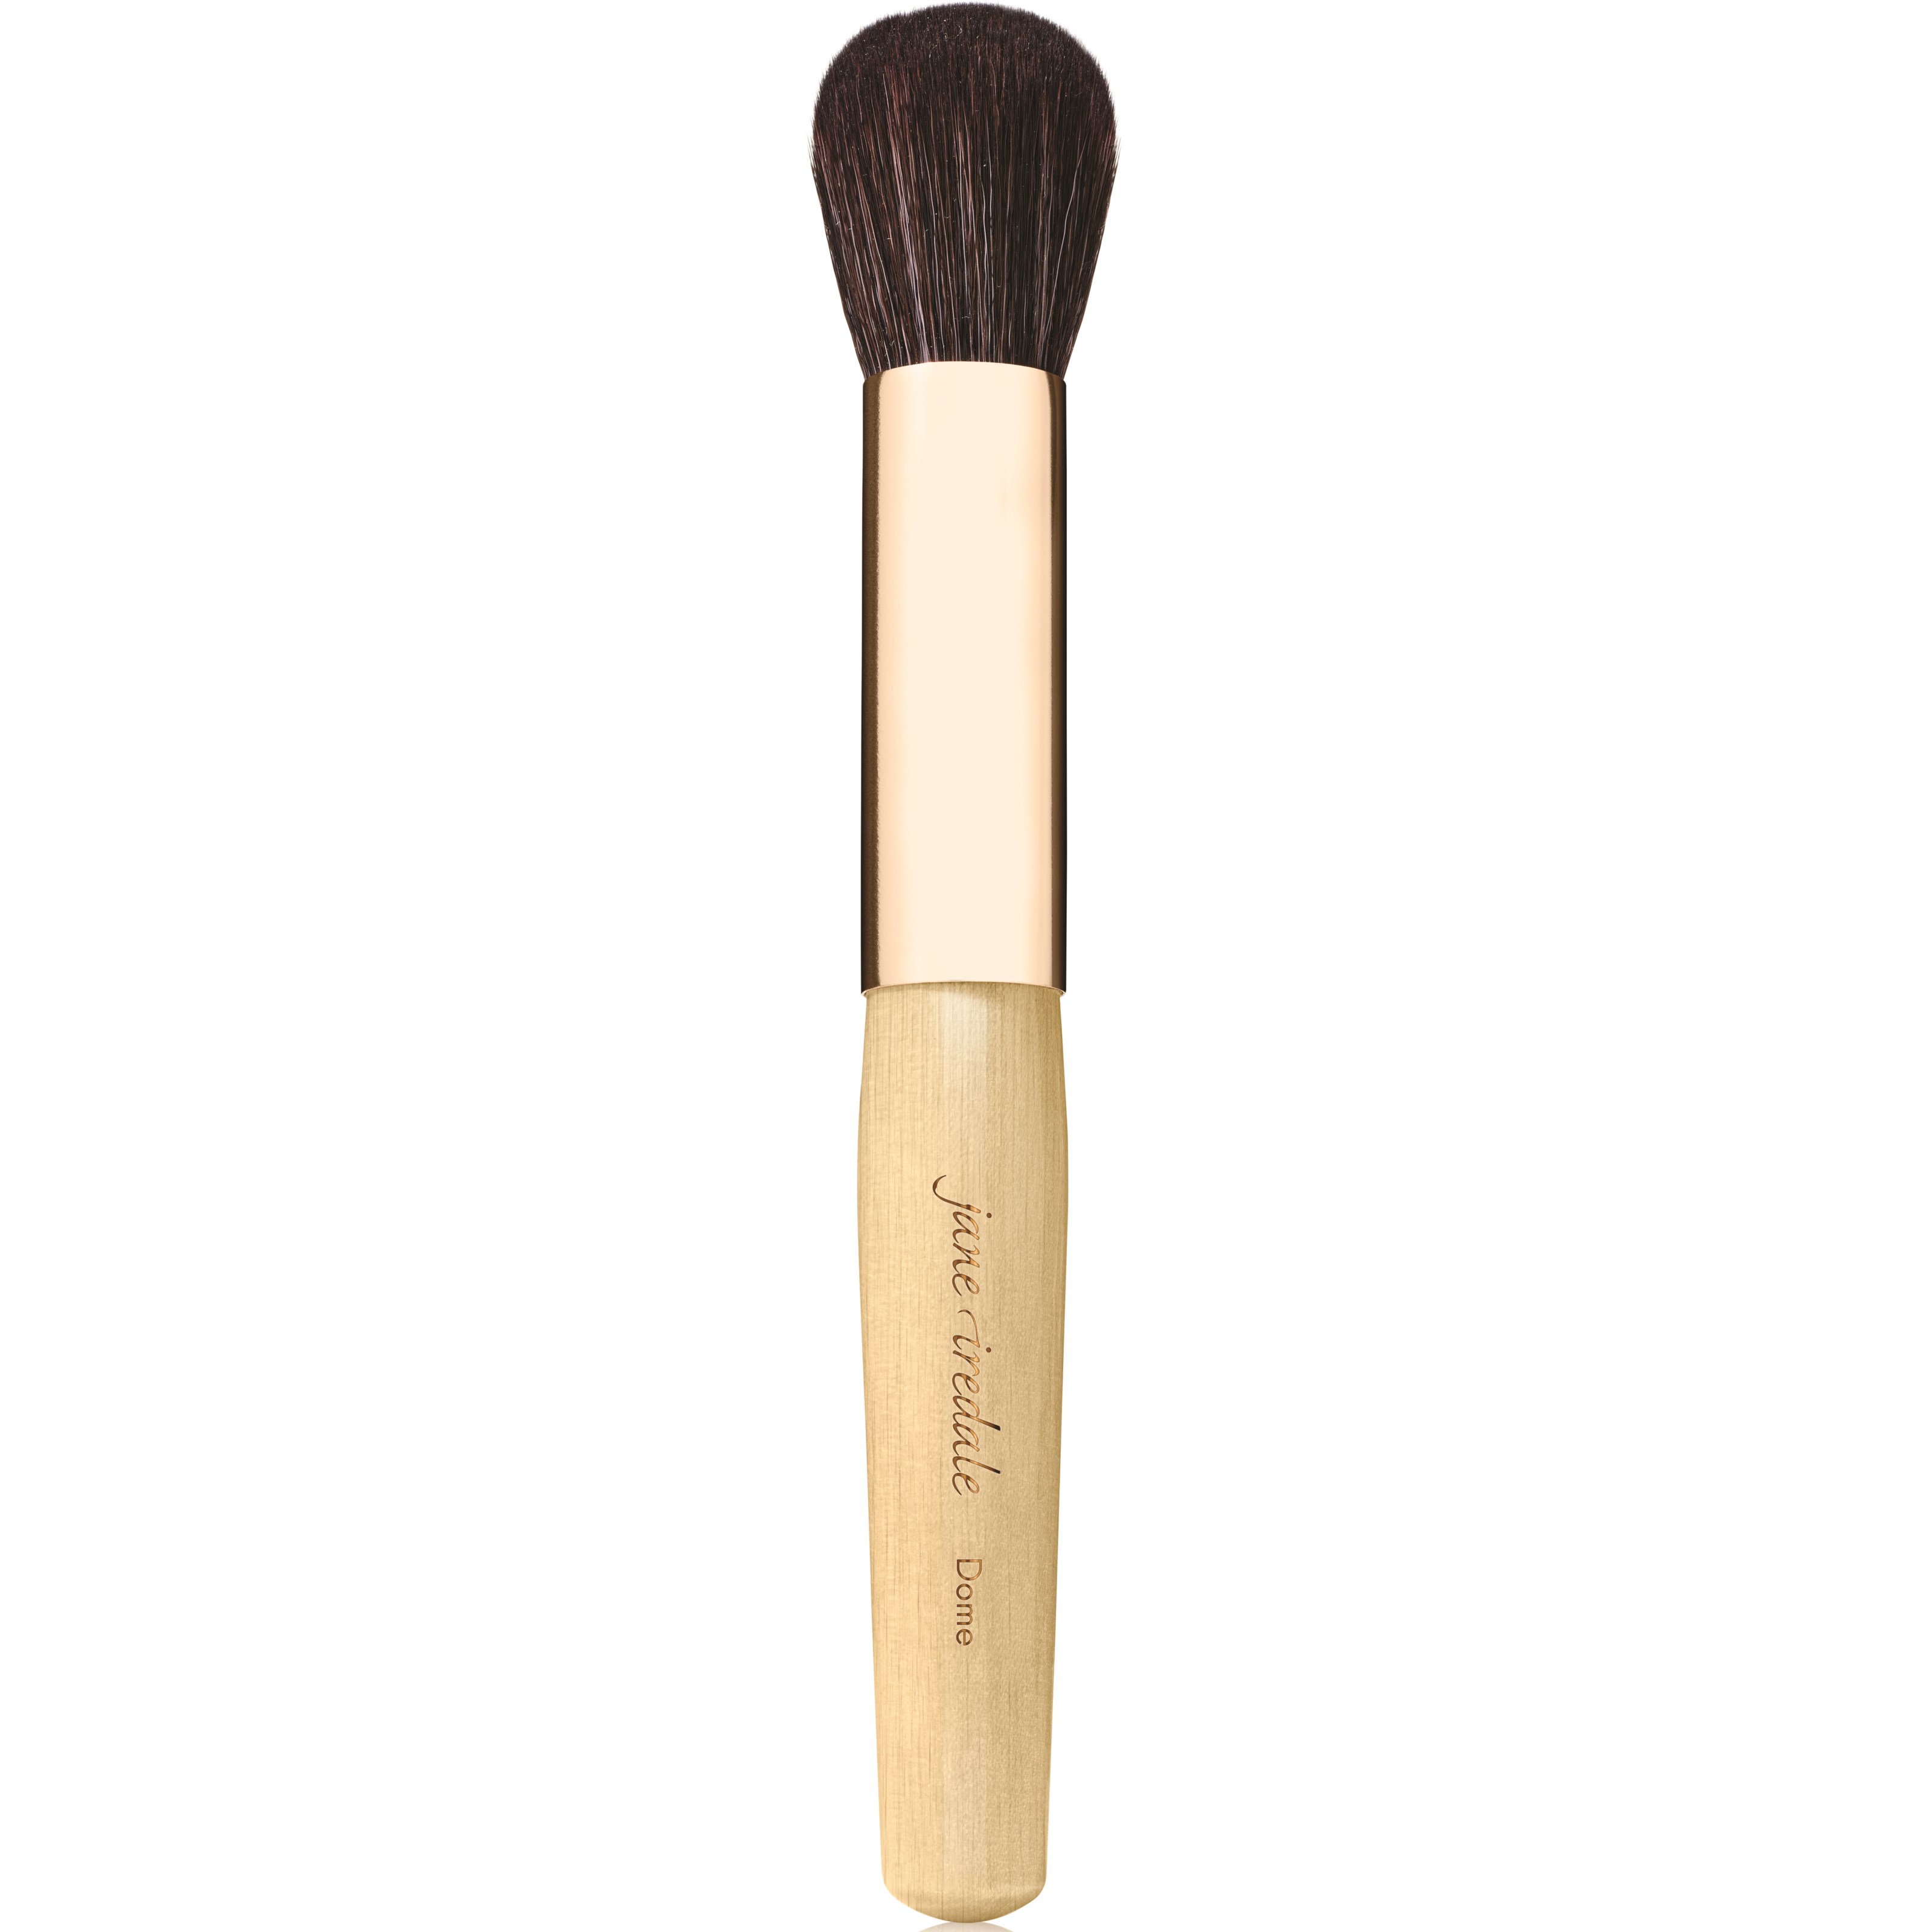 Jane Iredale Brushes Dome